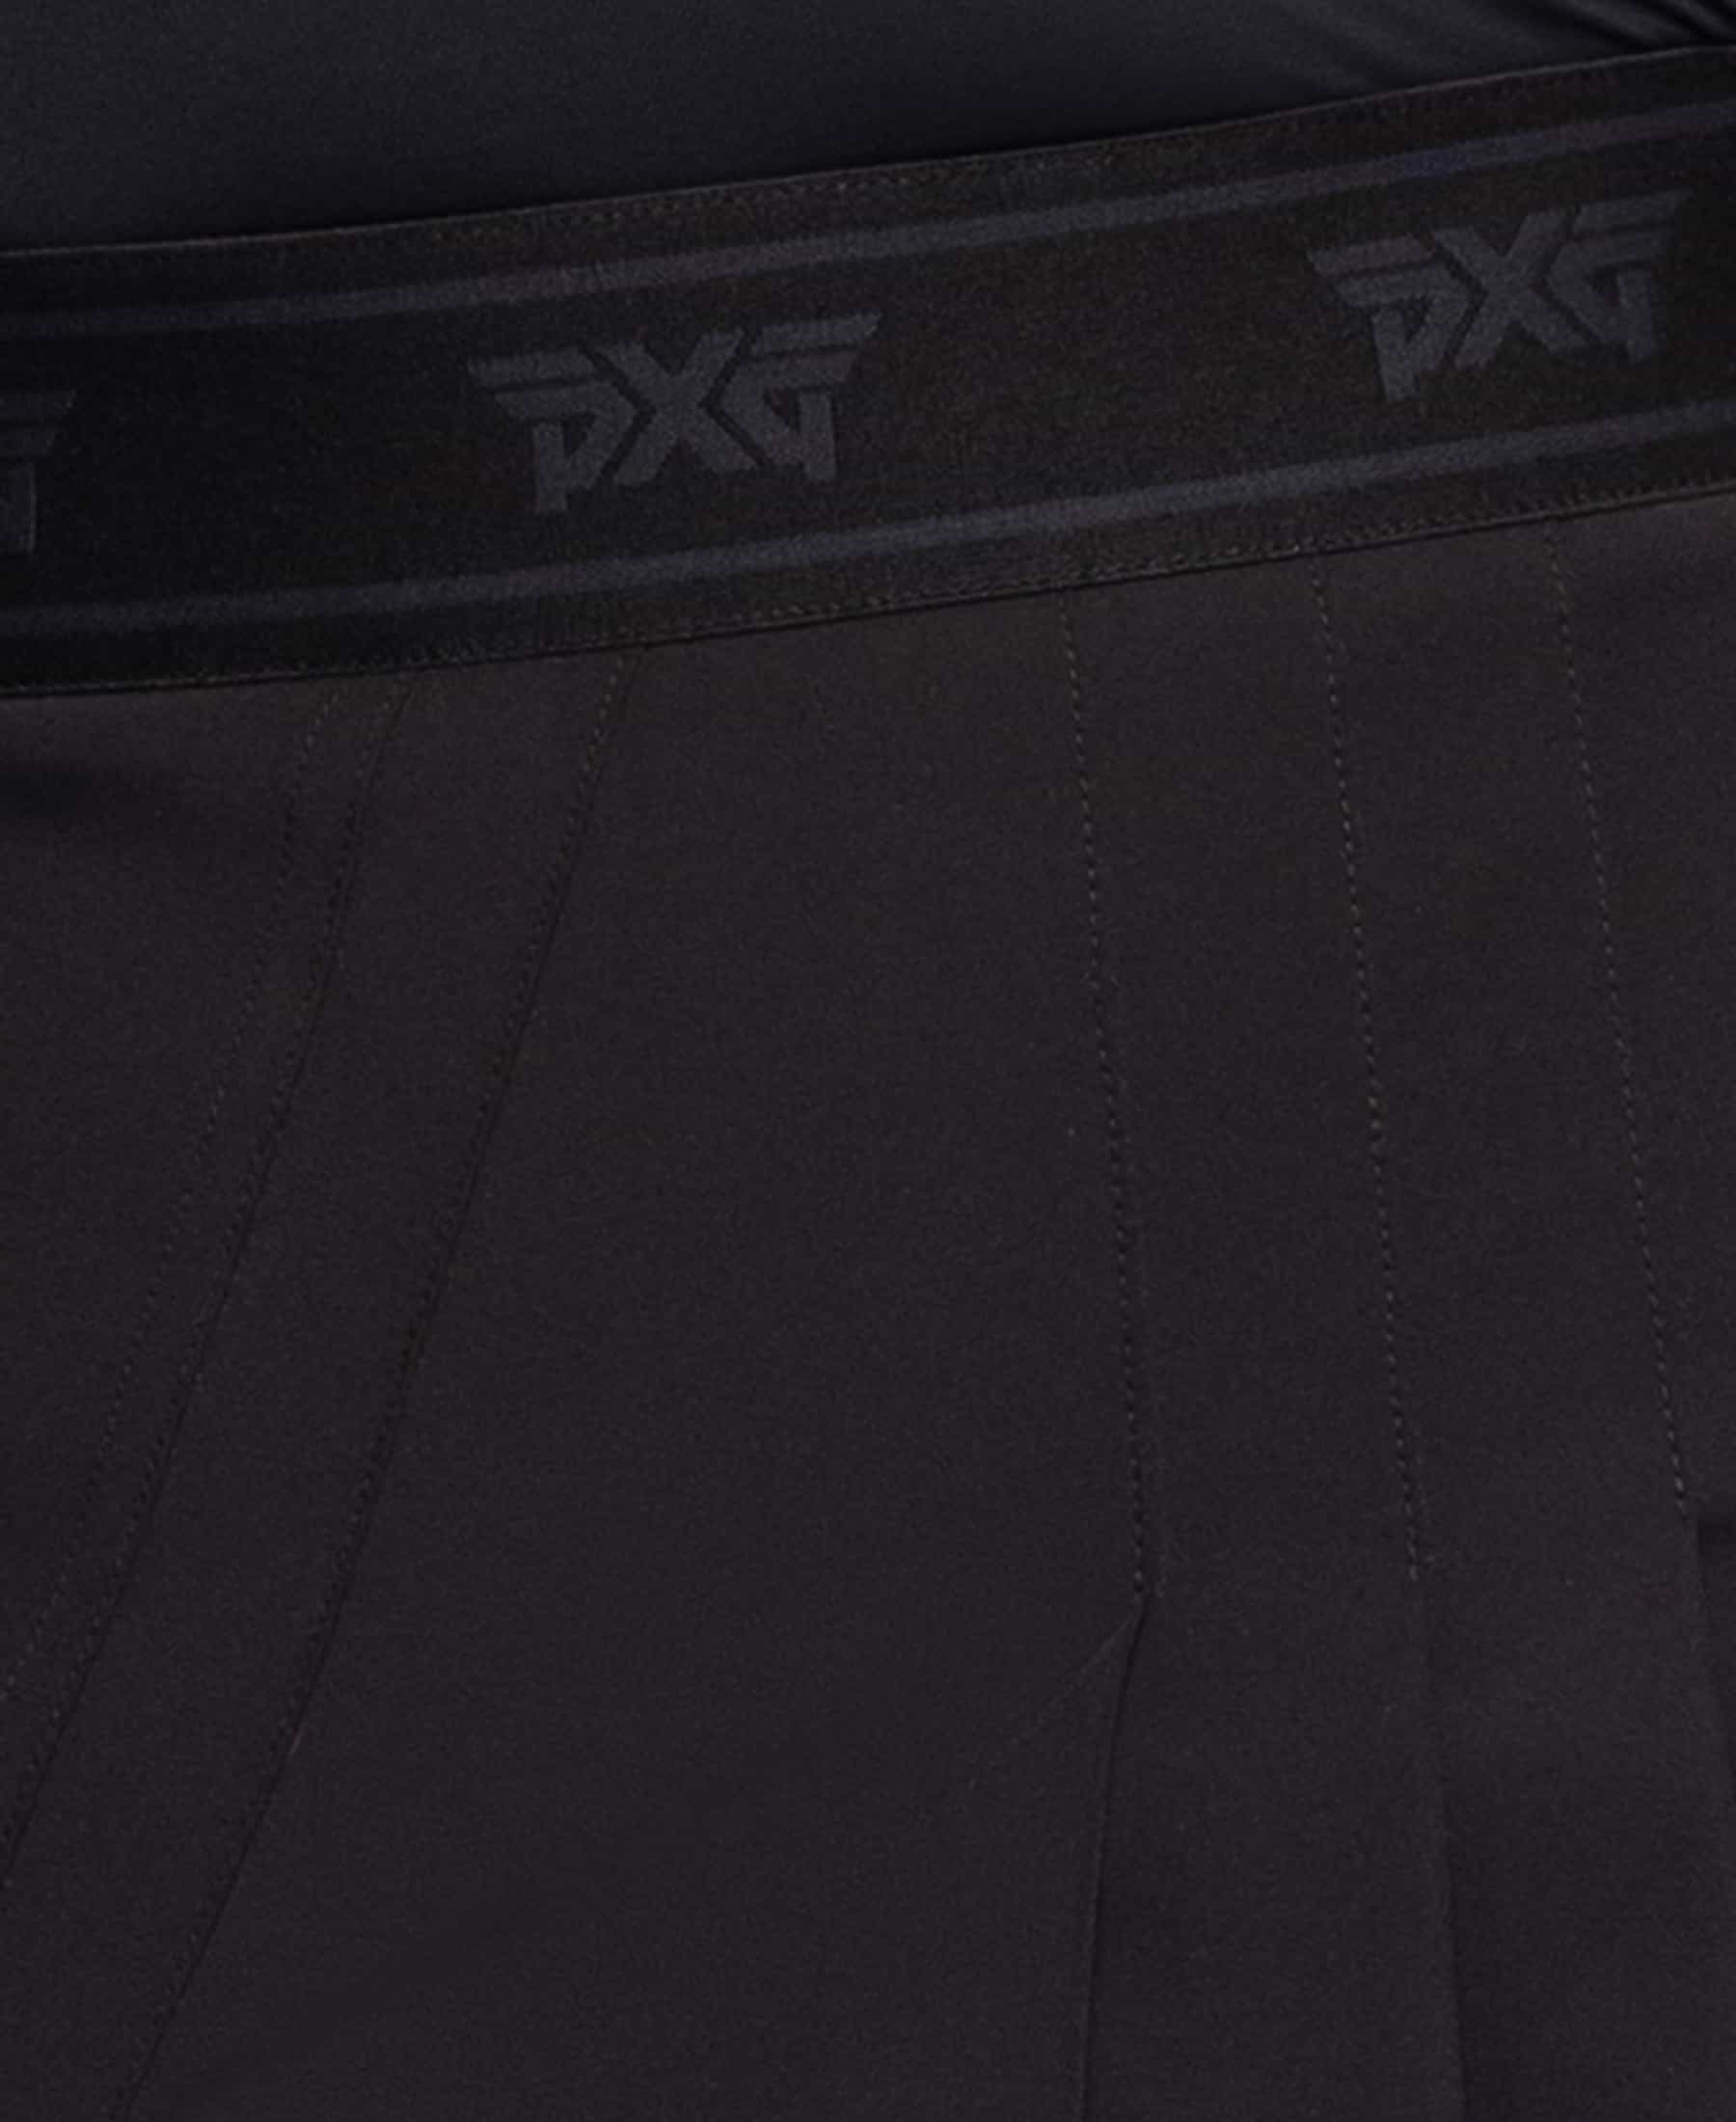 PXG Women's Big Logo Color Block Pleated Skirt | Size Small